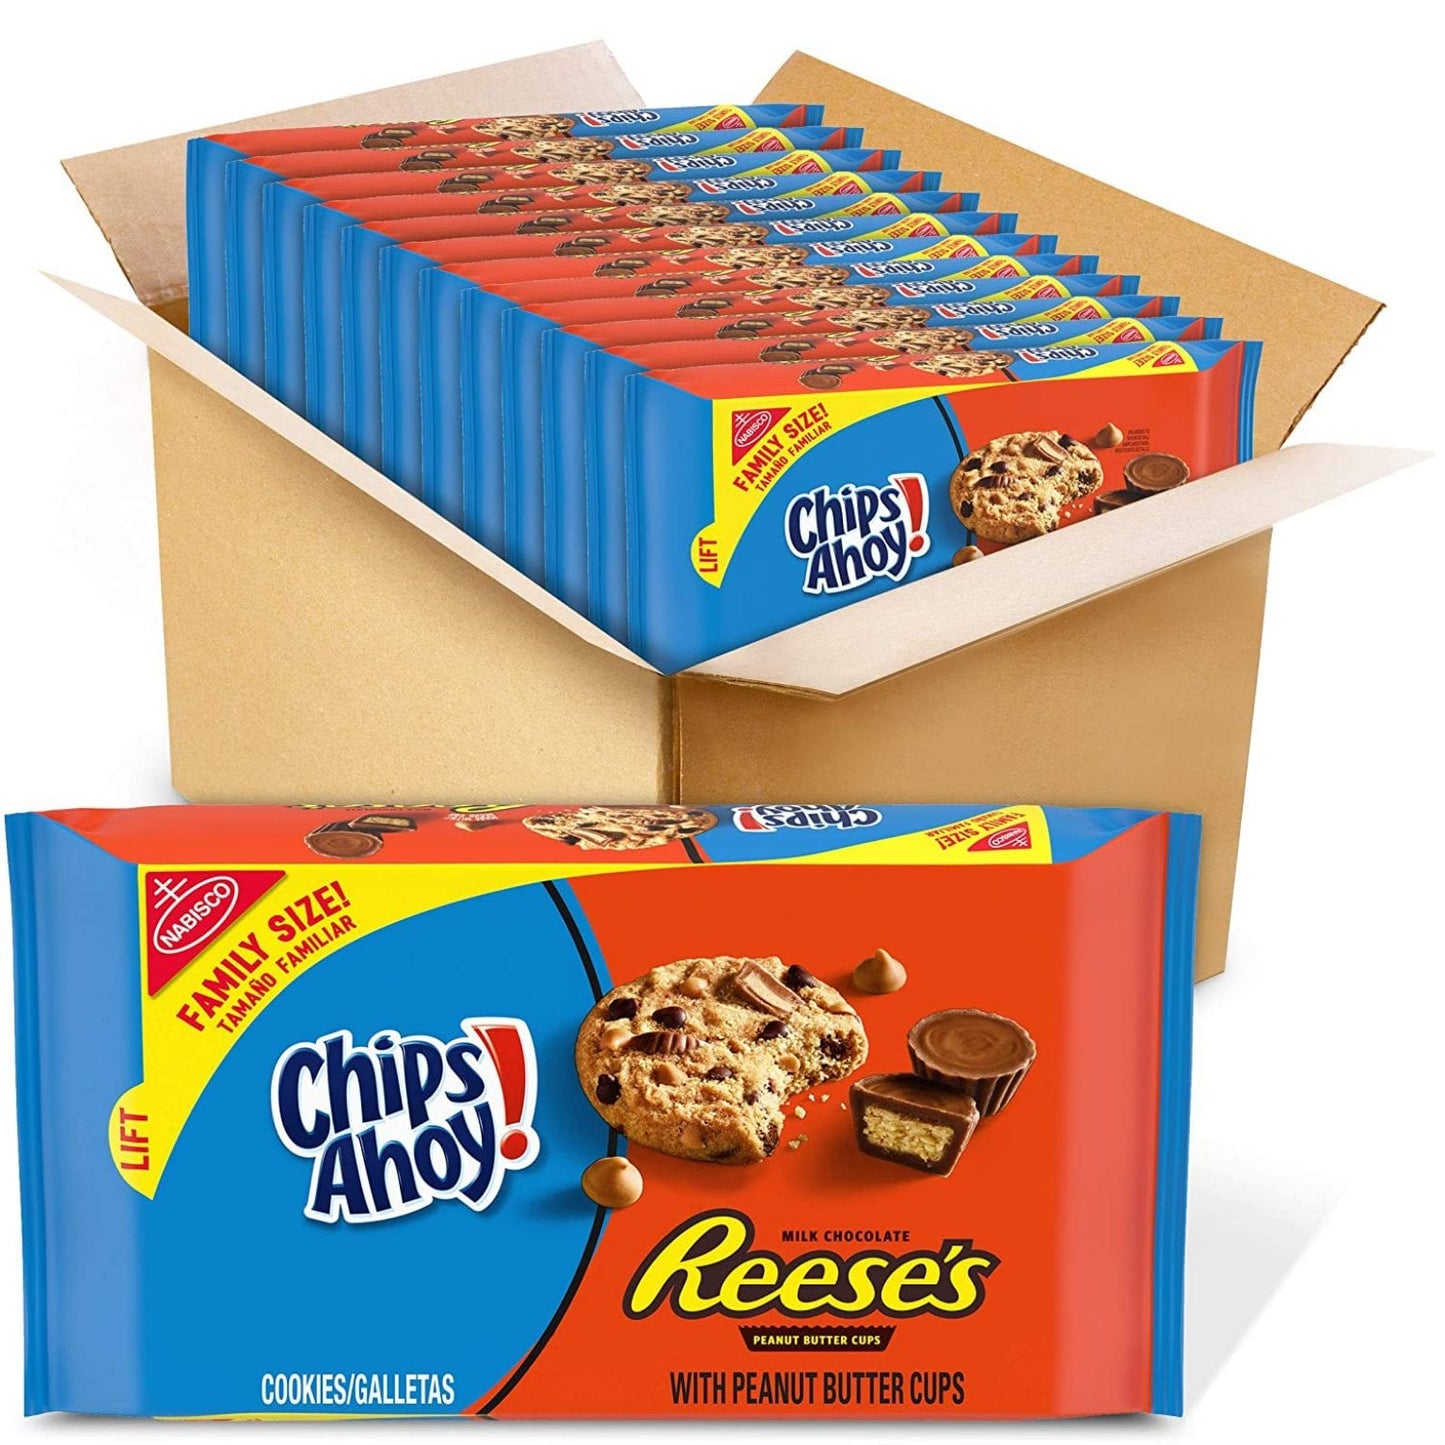 Chips Ahoy! Cookies with Reeses Peanut Butter Cups Family Size 14.25 oz Packs, Chocolate Chip